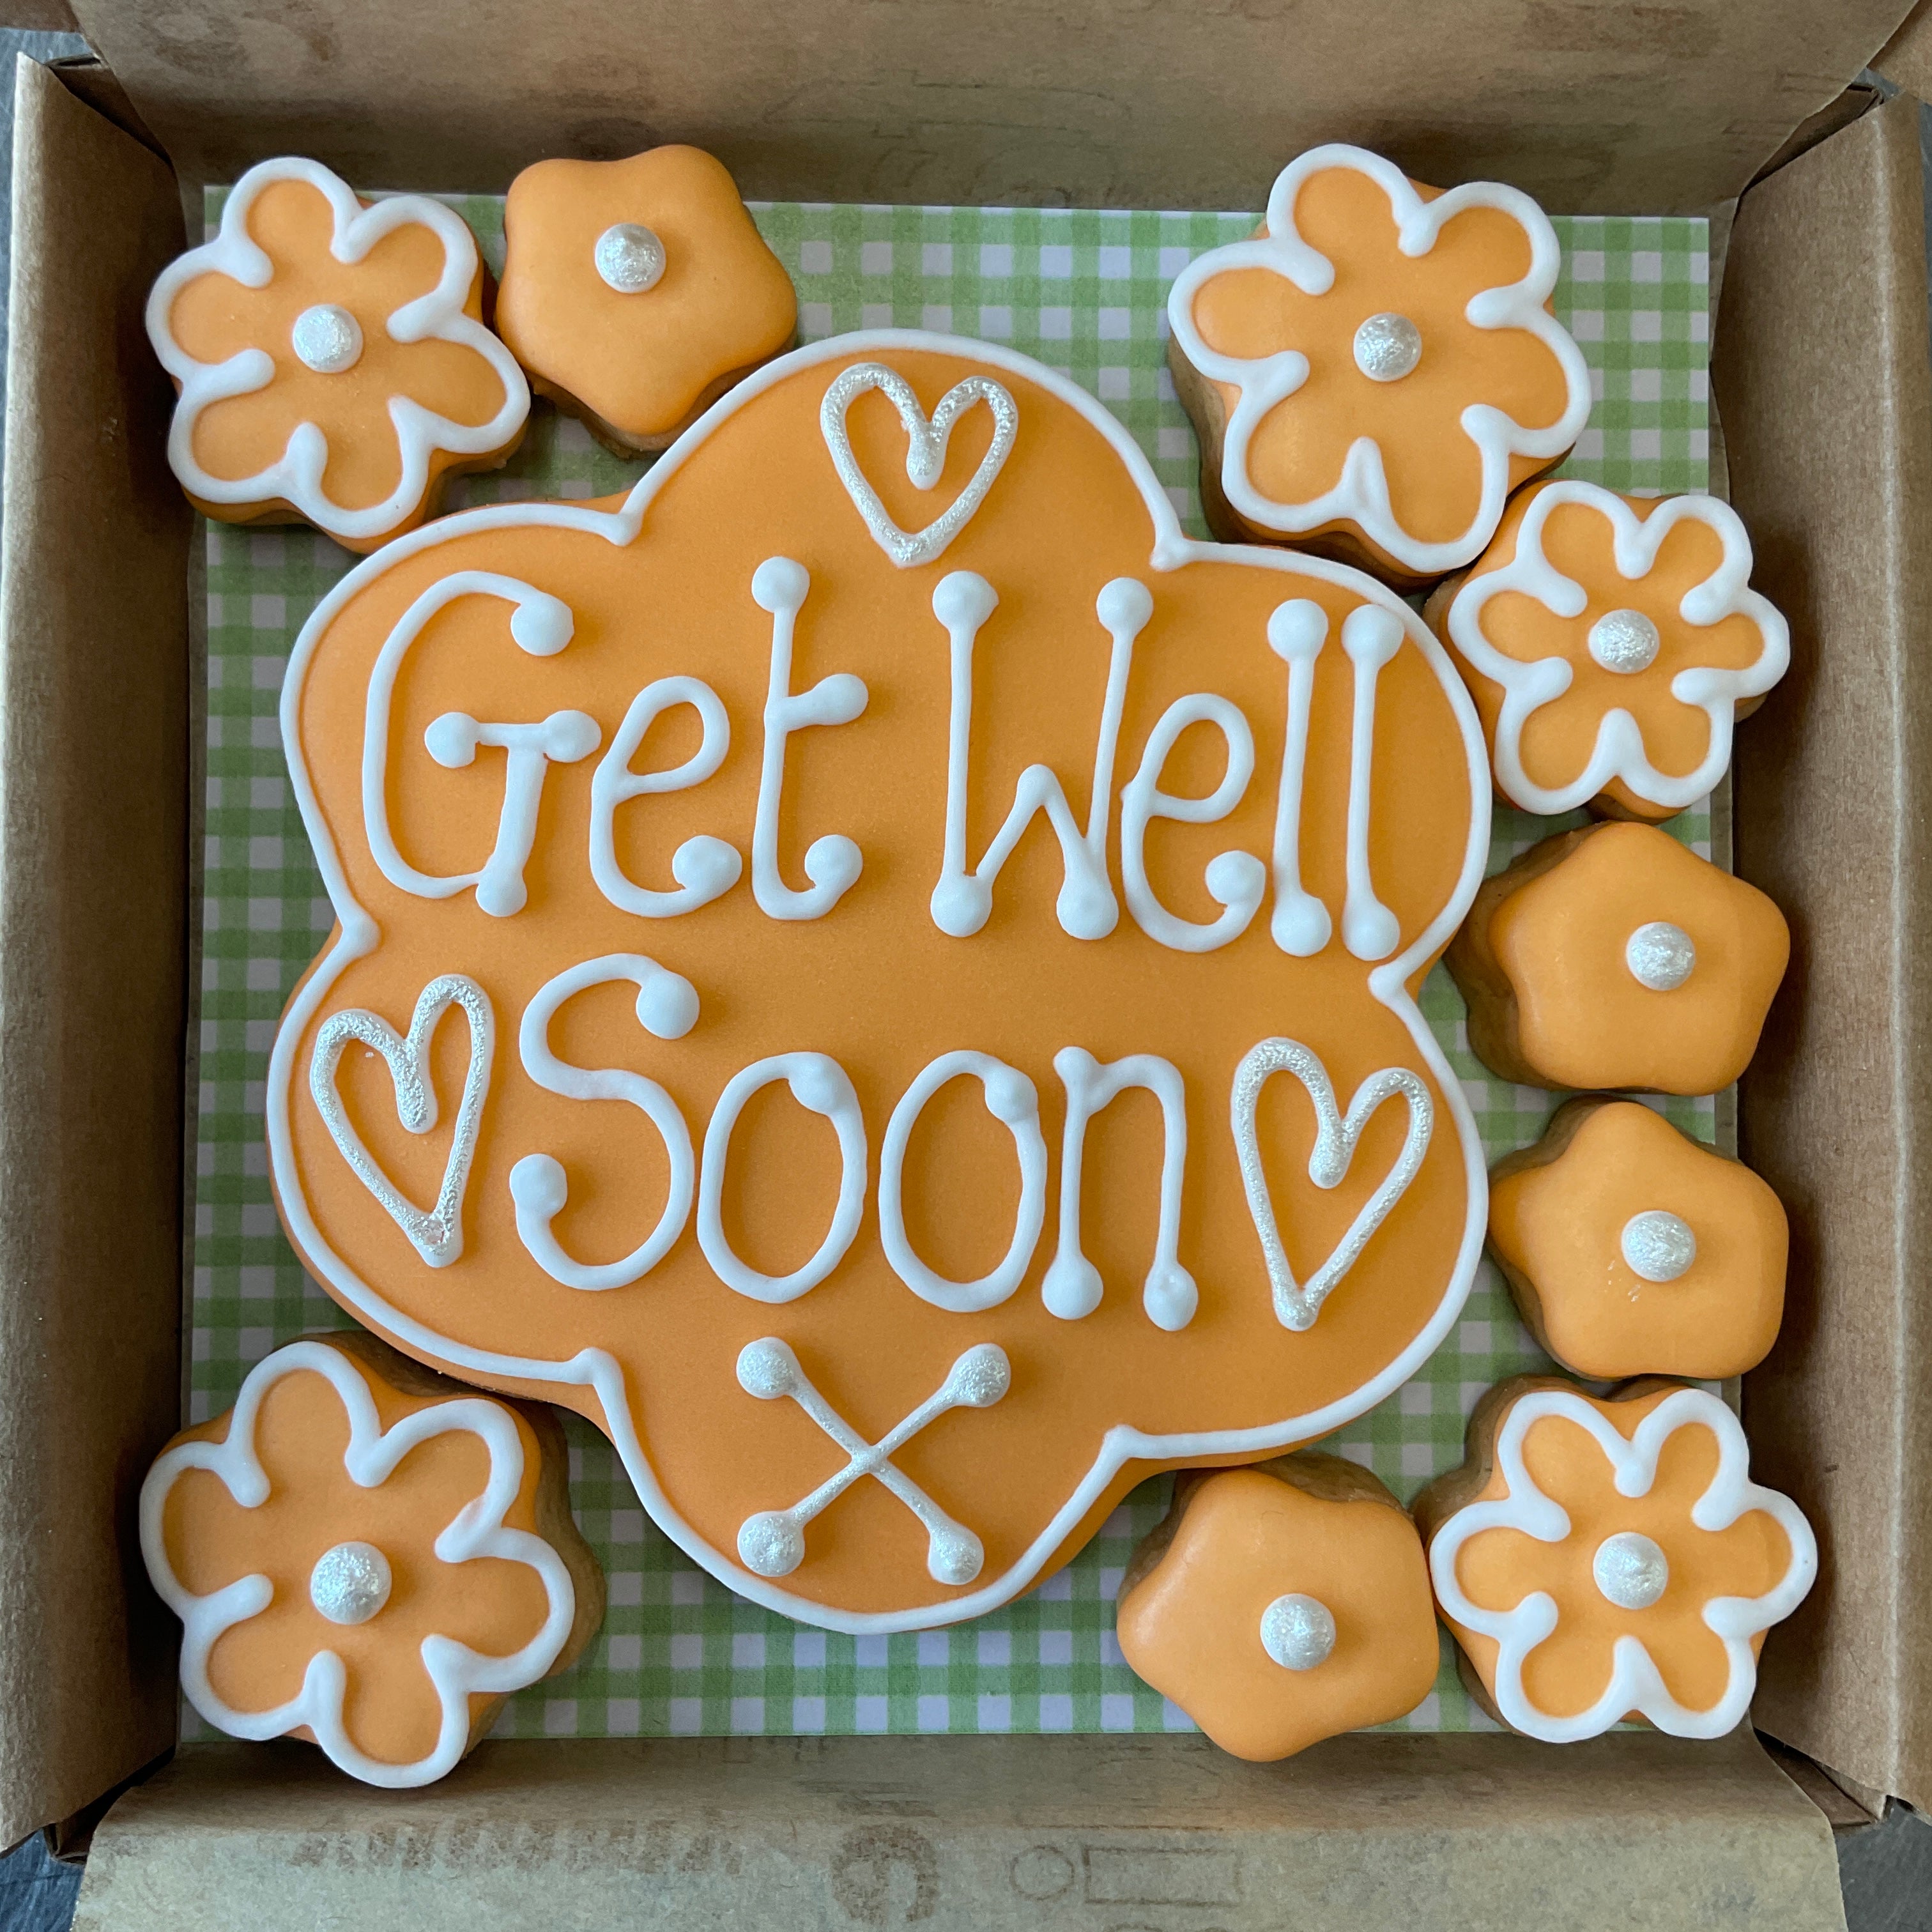 Get Well Soon Cookie Box